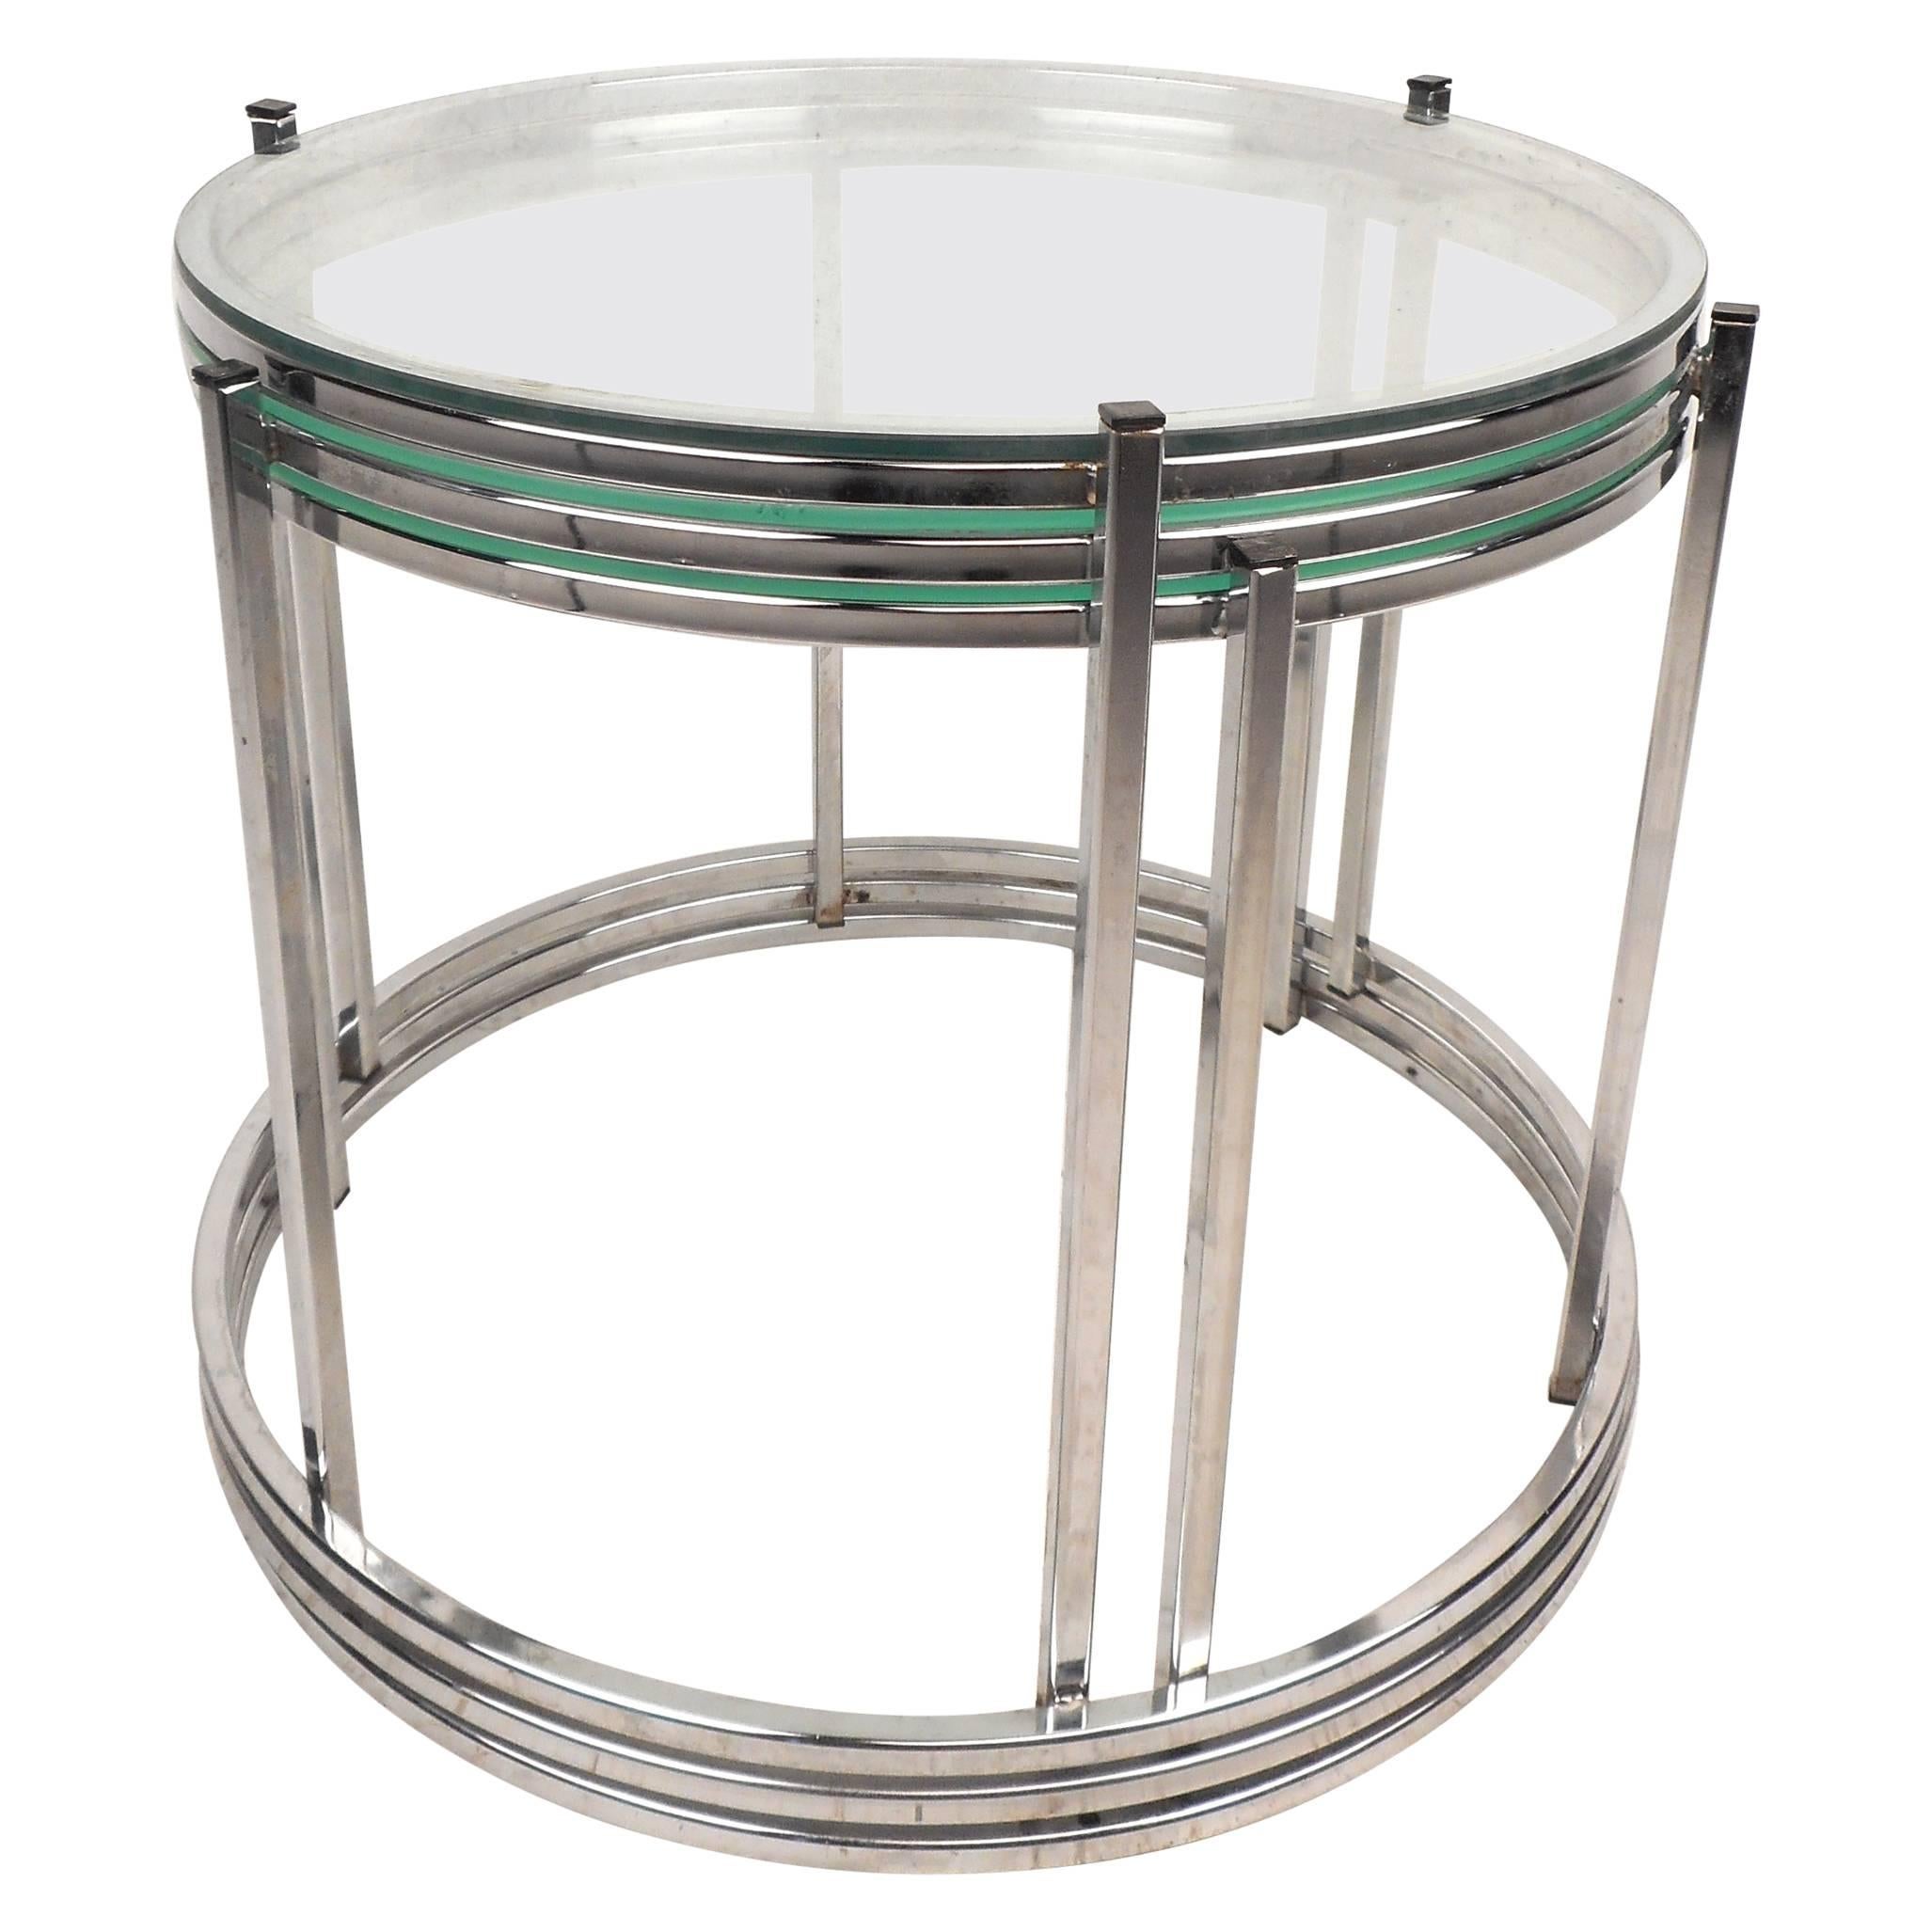 Mid-Century Modern Chrome and Glass Nesting Tables in the Style of Milo Baughman